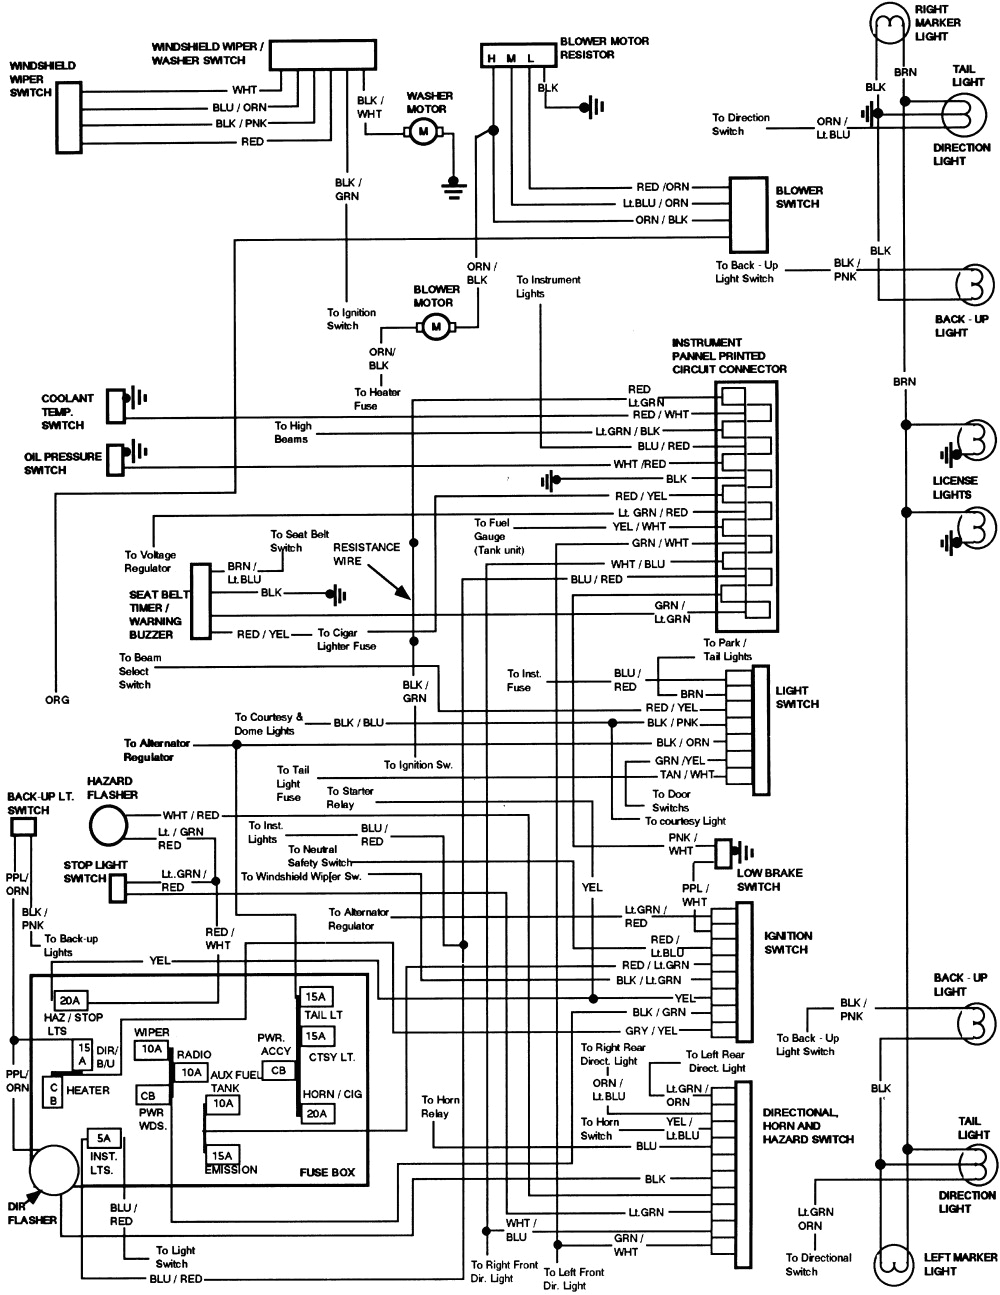 2002 ford f 150 2wd wiring schematic wiring diagram expert 2002 ford f 150 wiring diagram